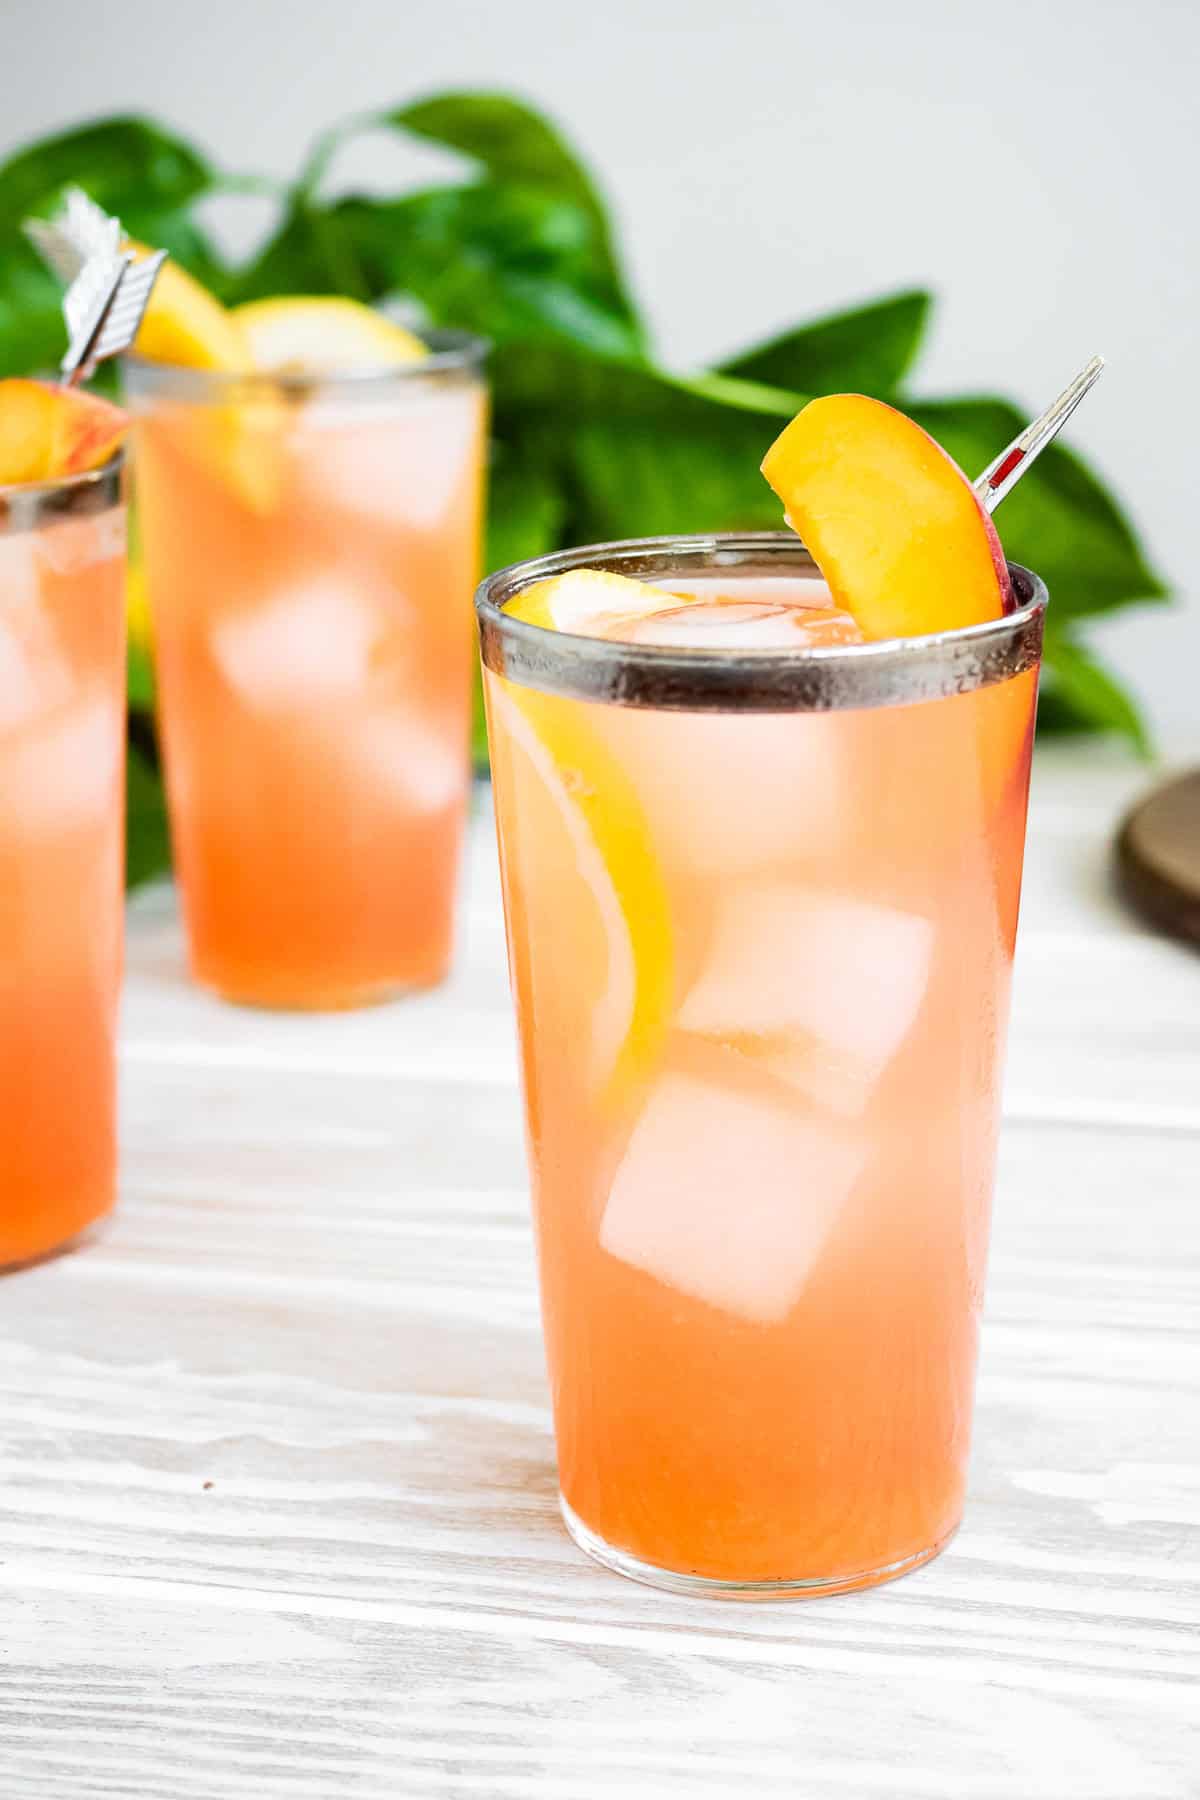 A close up of a glass of peach lemonade in front of 2 more glasses of the lemonade.